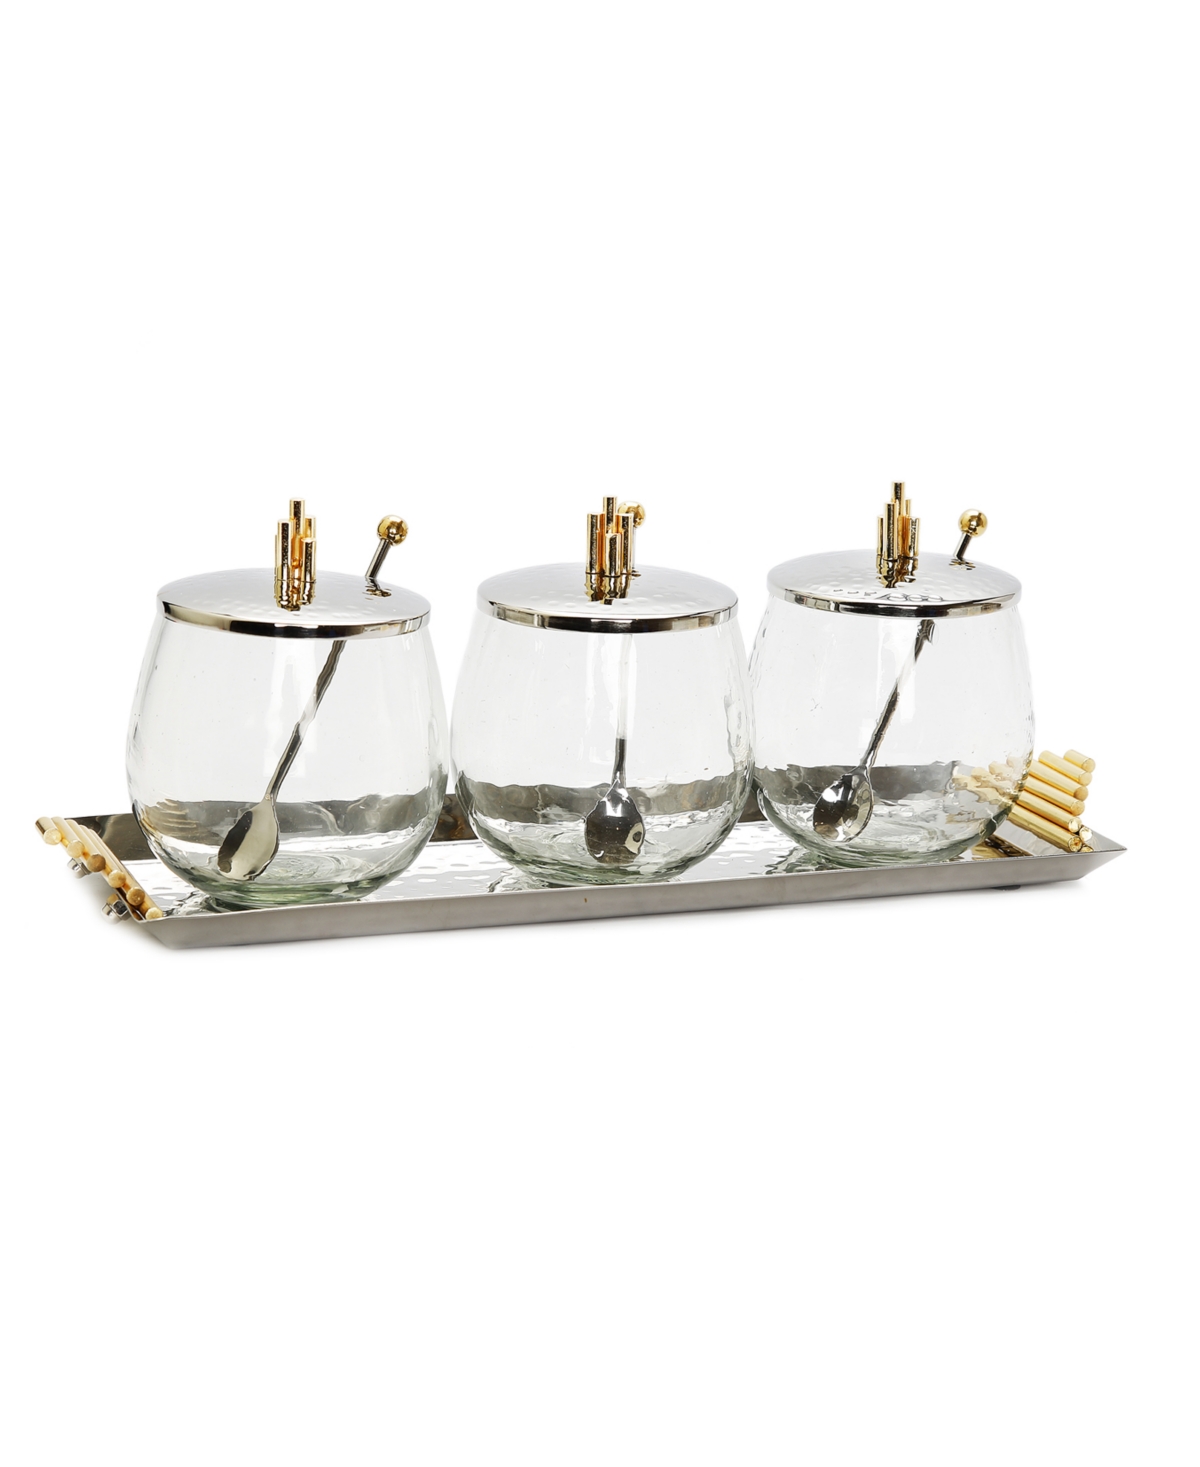 Shop Classic Touch Hammered Tray With 3 Glass Bowls Symmetrical Design, Set Of 10 In Gold